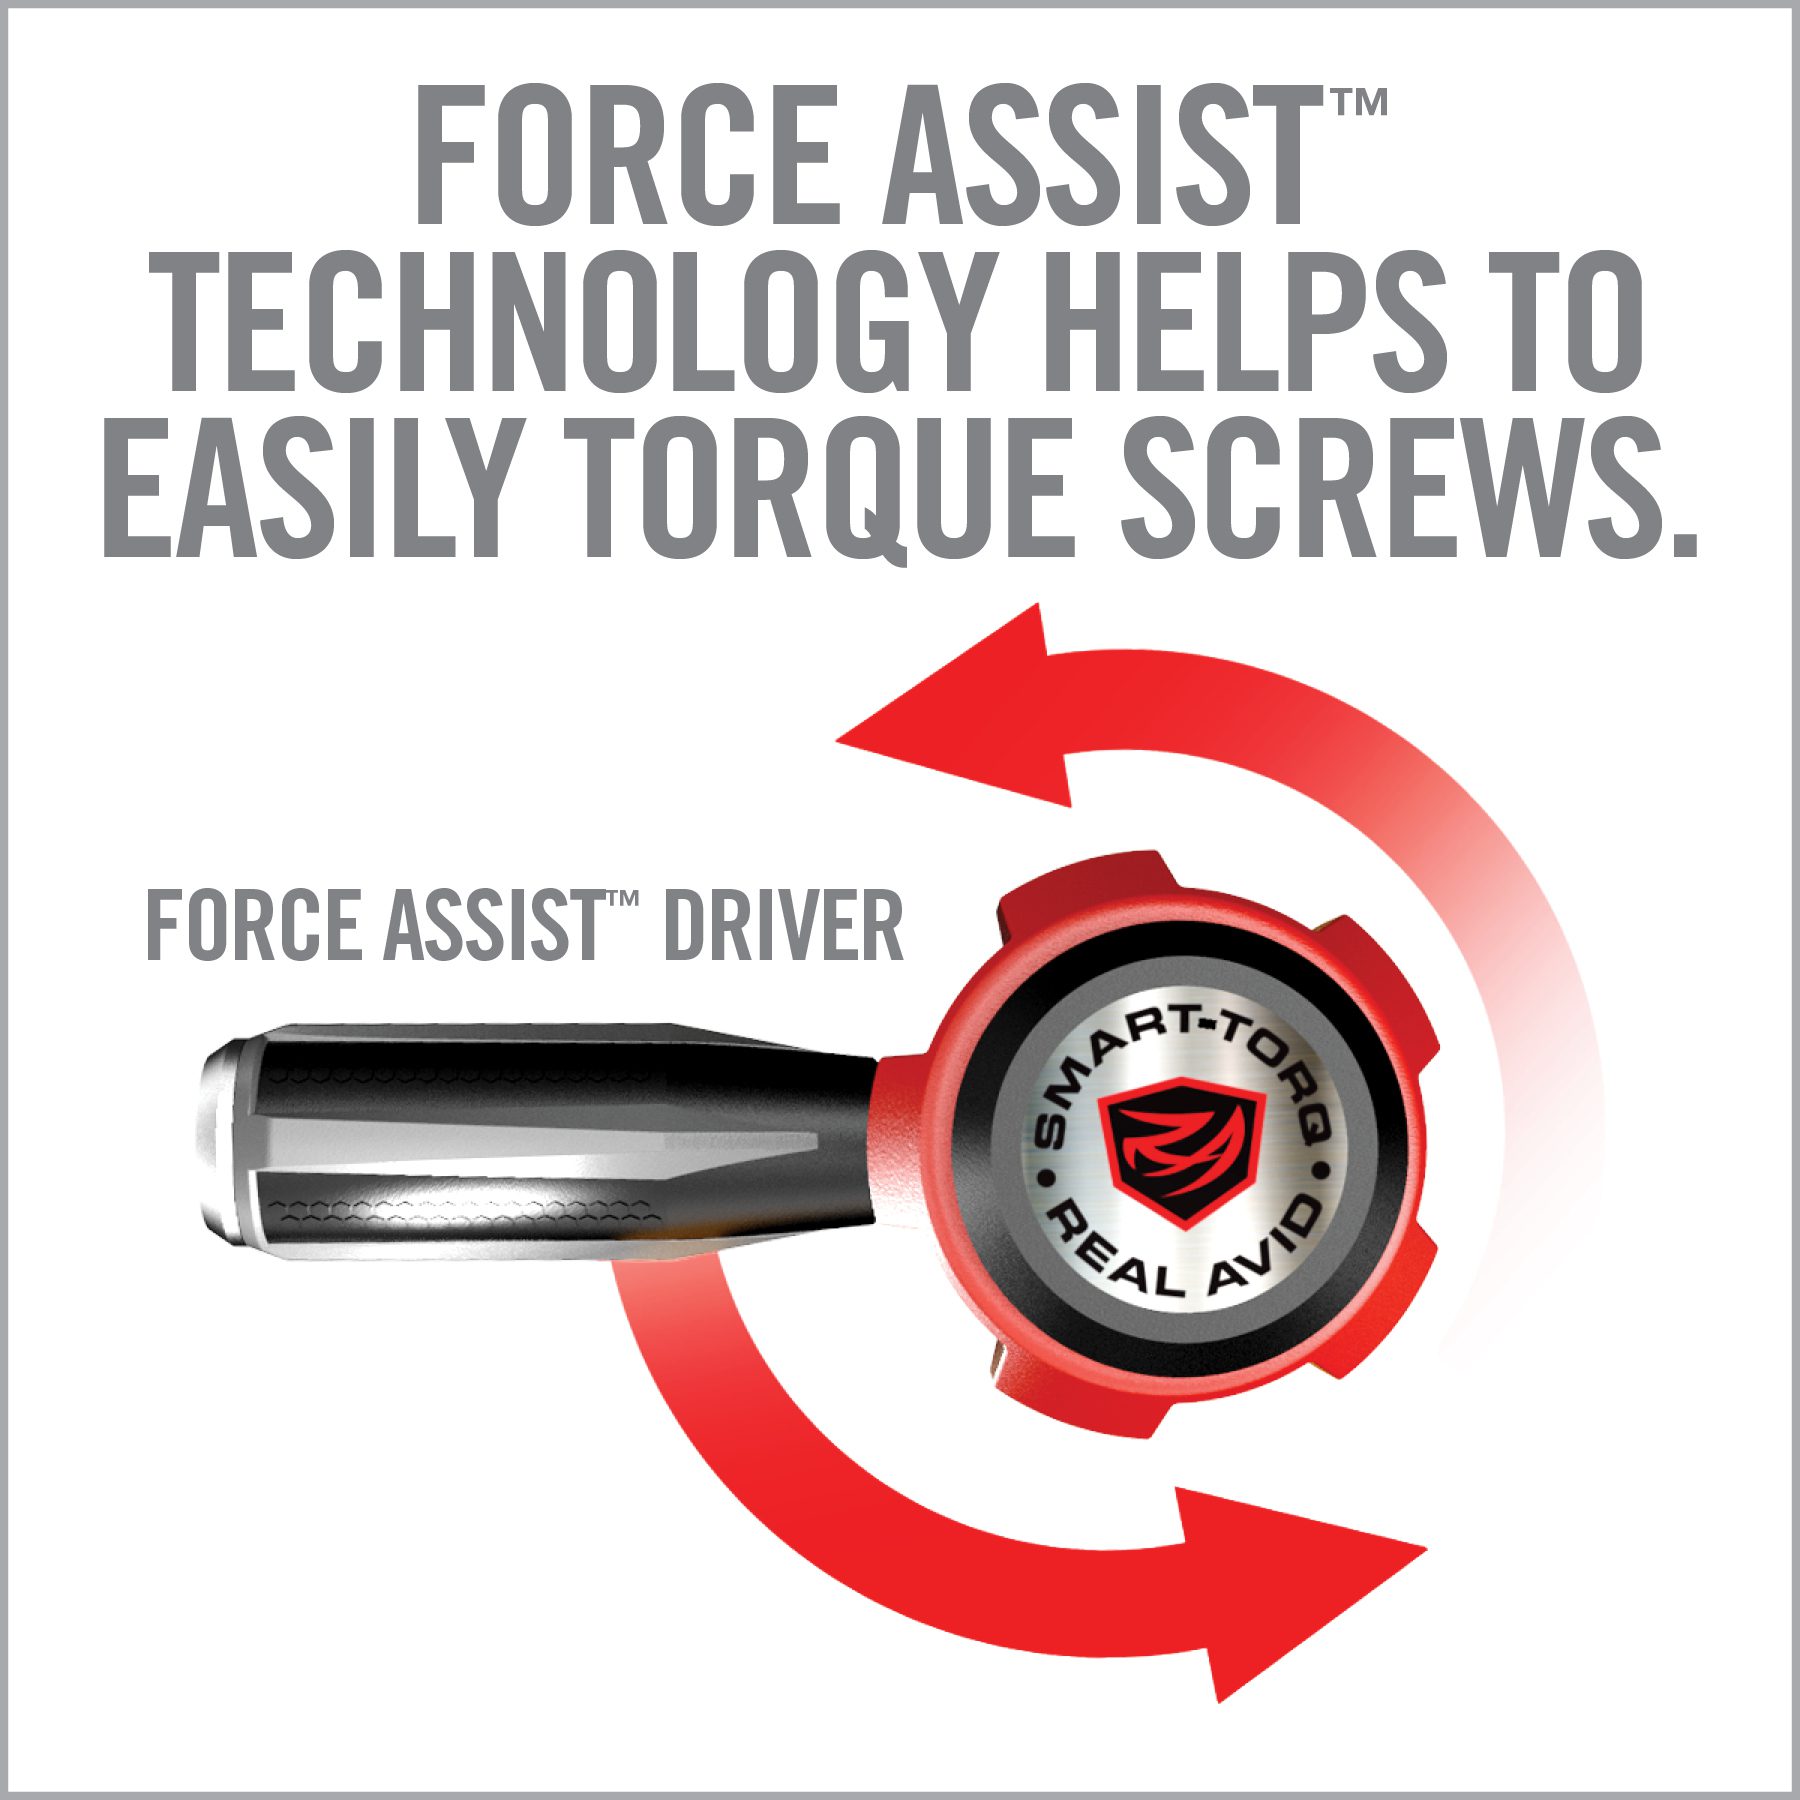 an advertisement for the force assist technology helps to easily drive screws